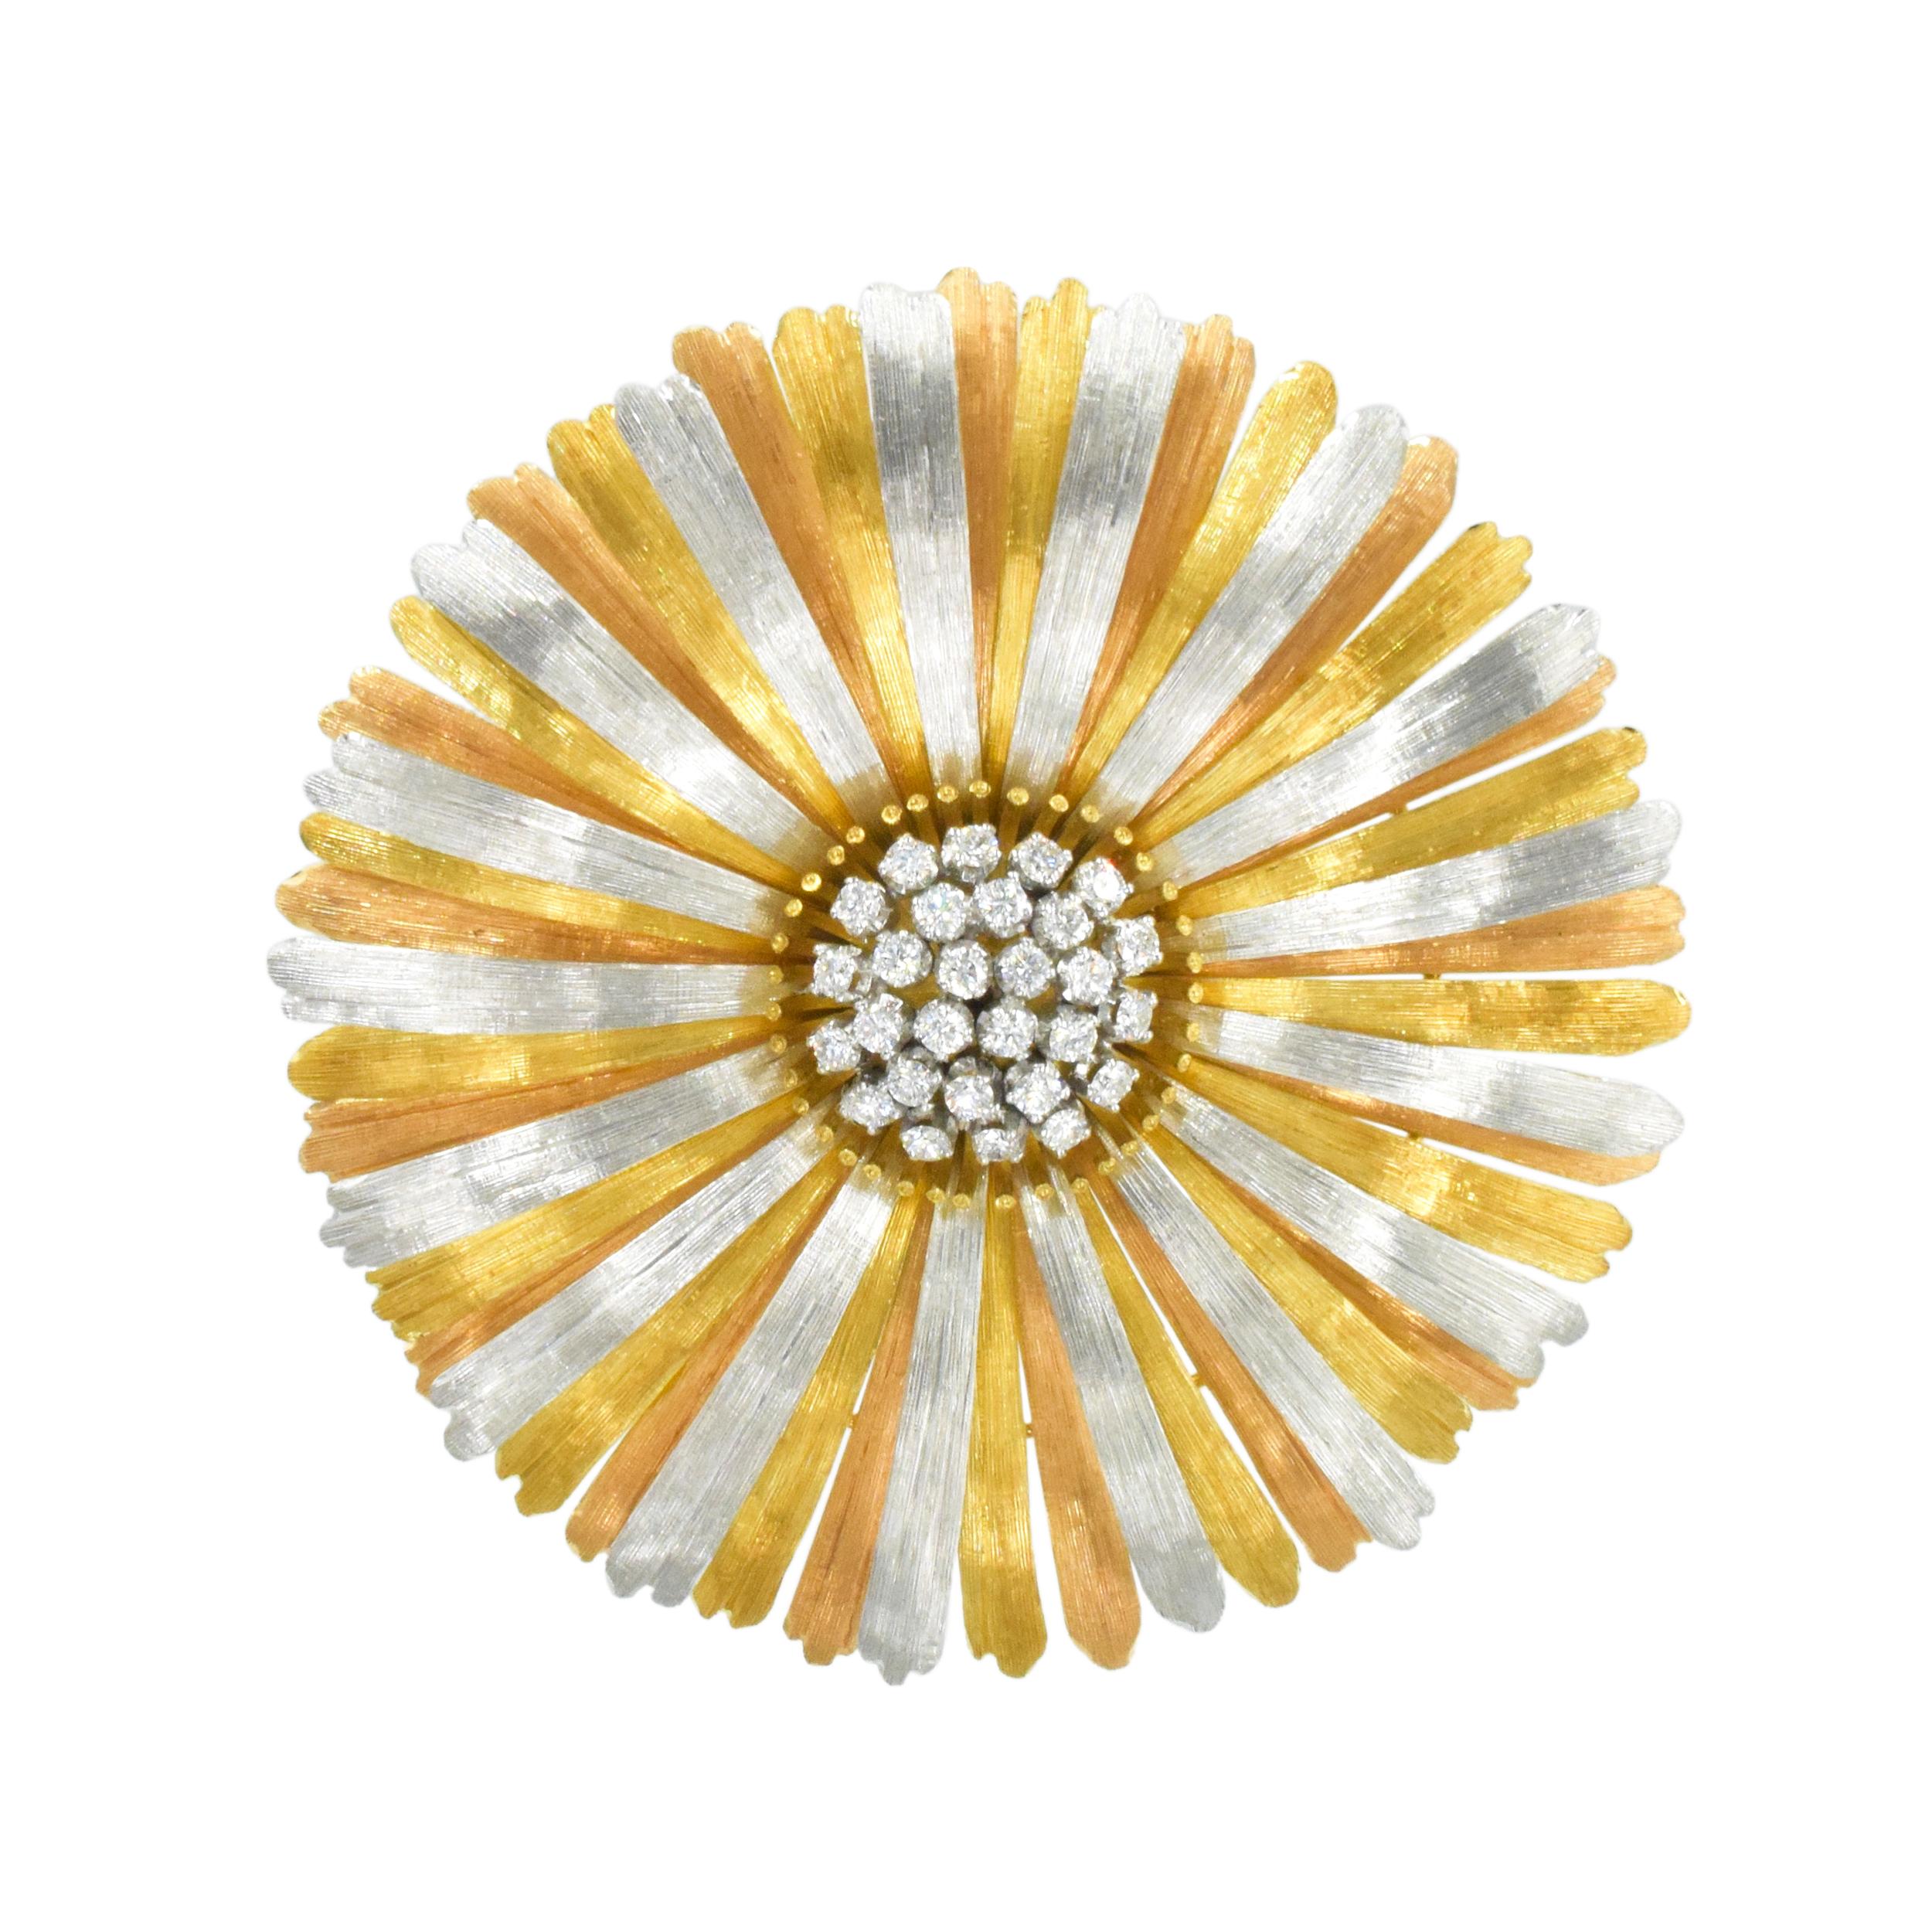 Buccellati Three-Color Gold and Diamond Brooch This brooch is designed as a flower, with yellow, white and pink 18k gold petals with beautiful textured finish. The center set with twenty eight round diamonds weighing 0.85ct, Color: G-H, Clarity: VS.